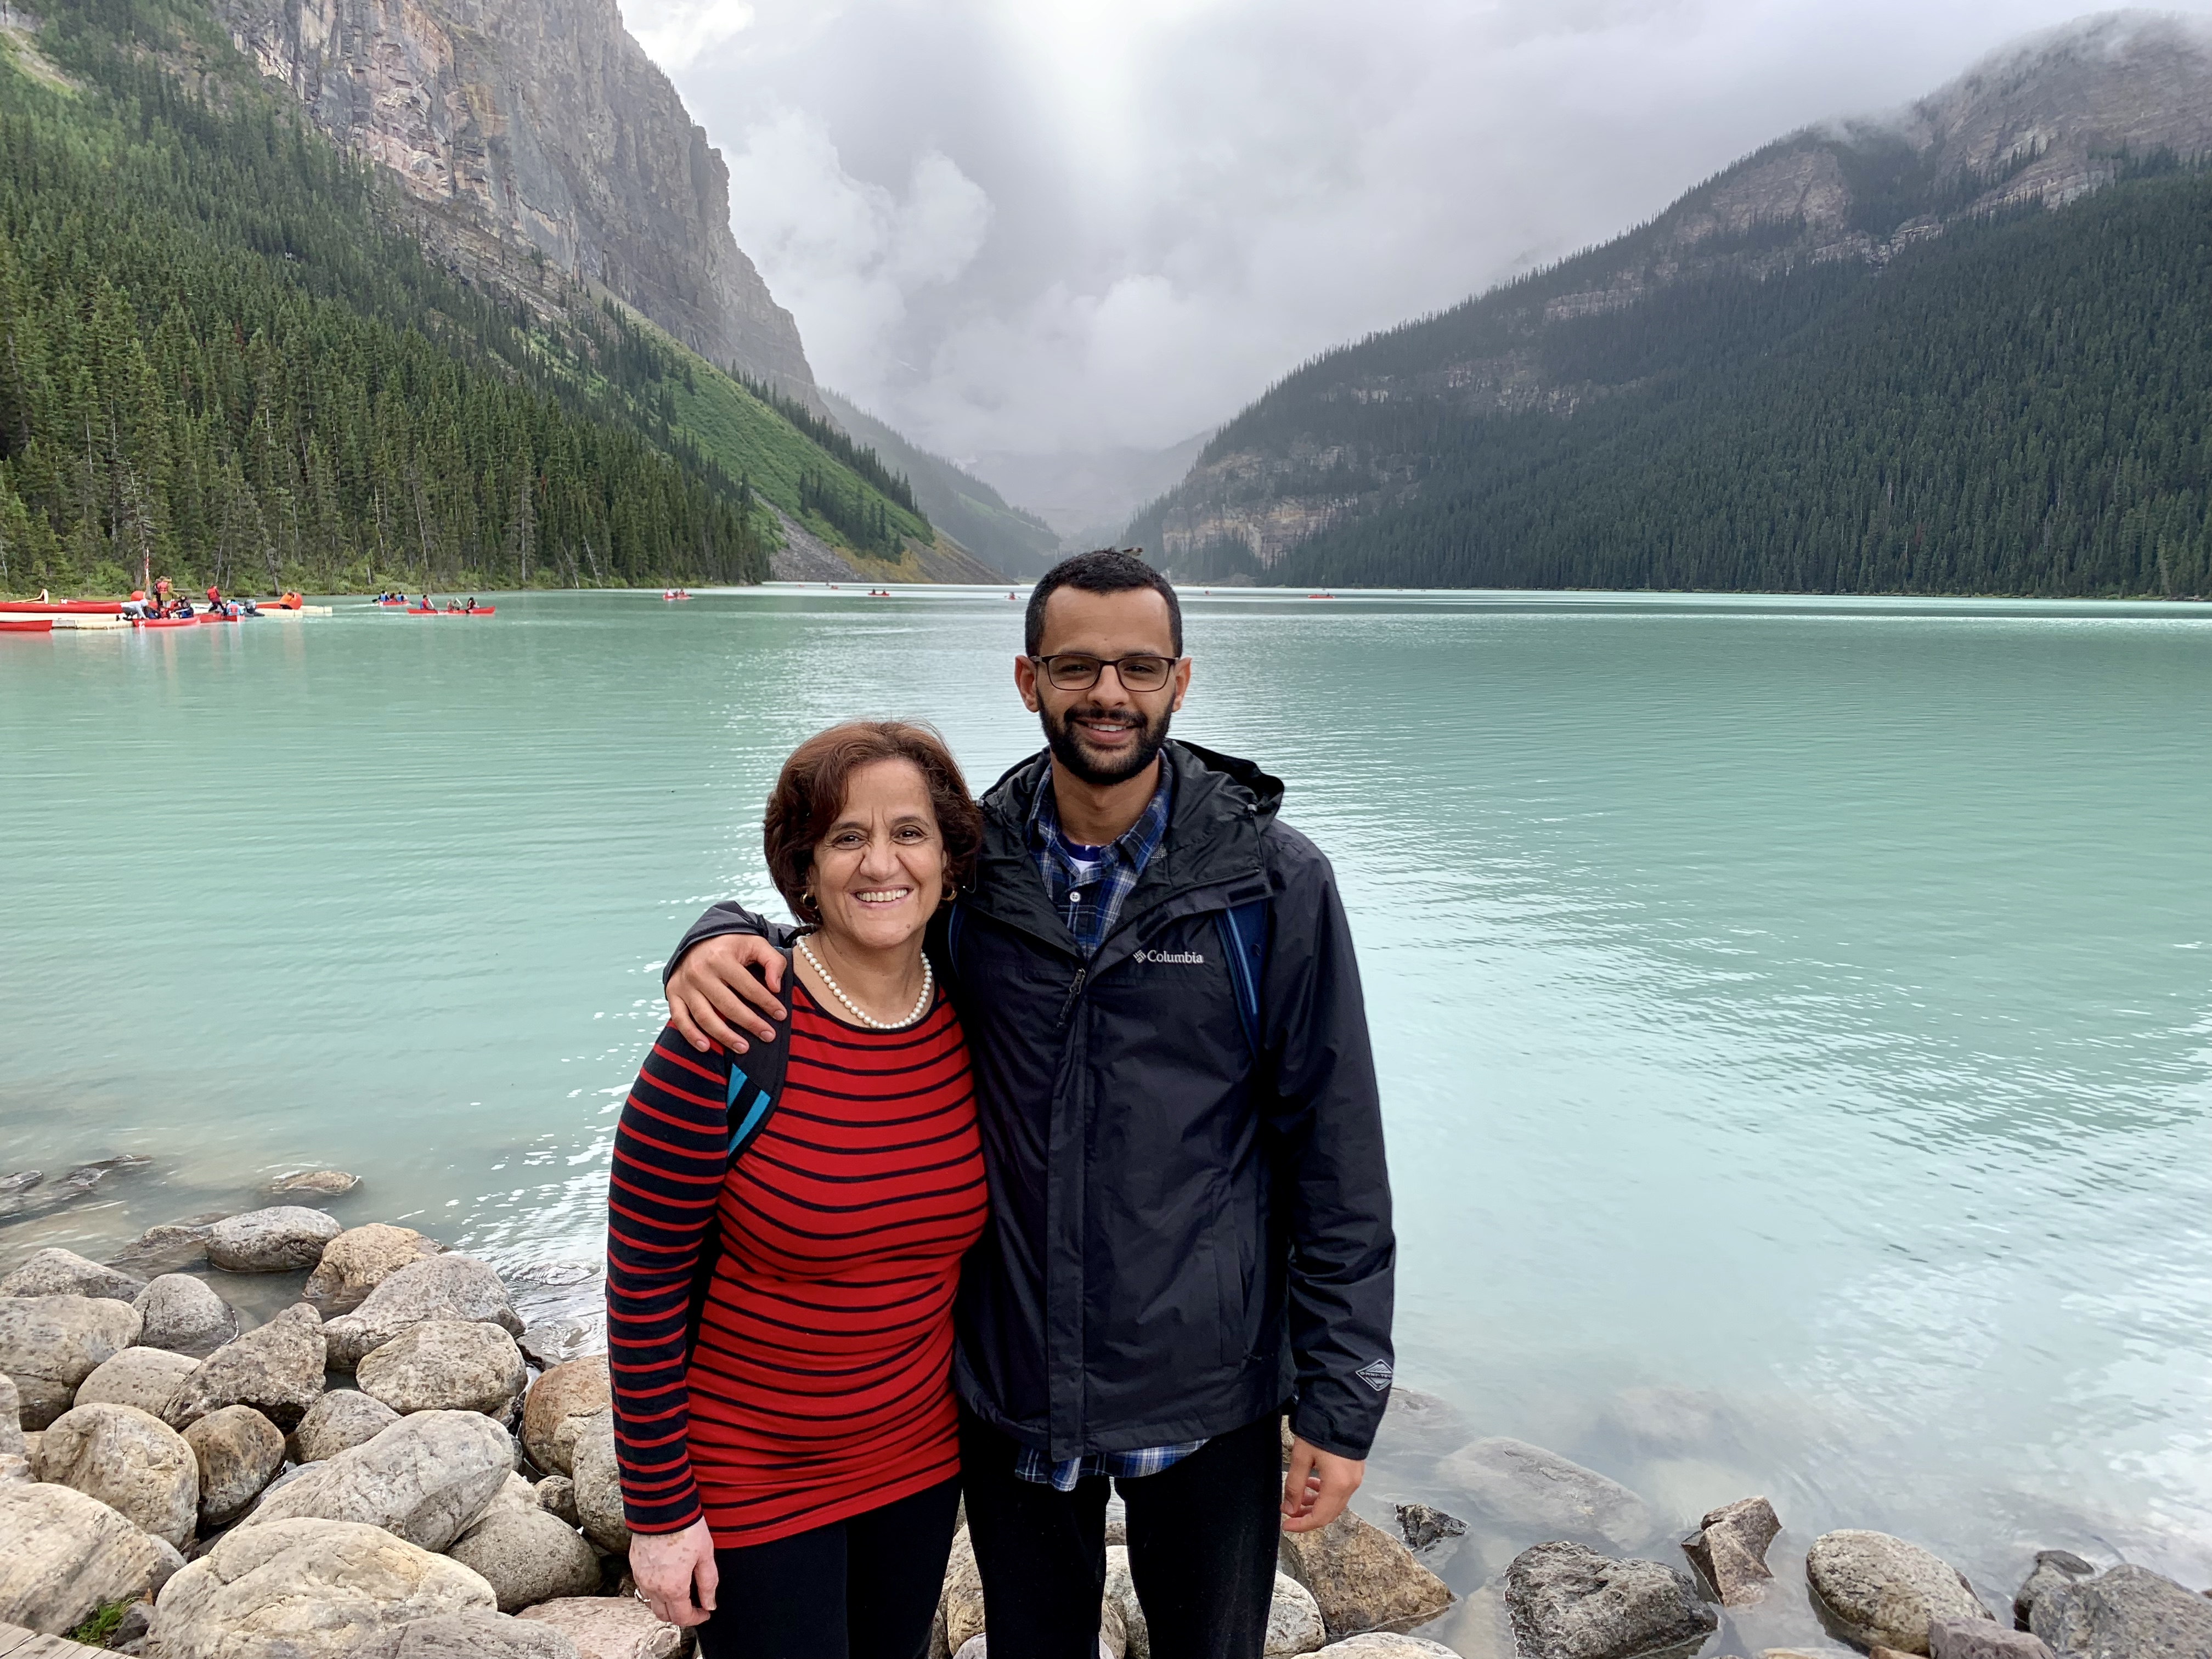 Baher Iskander MPA '22 and his mother at a mountain lake